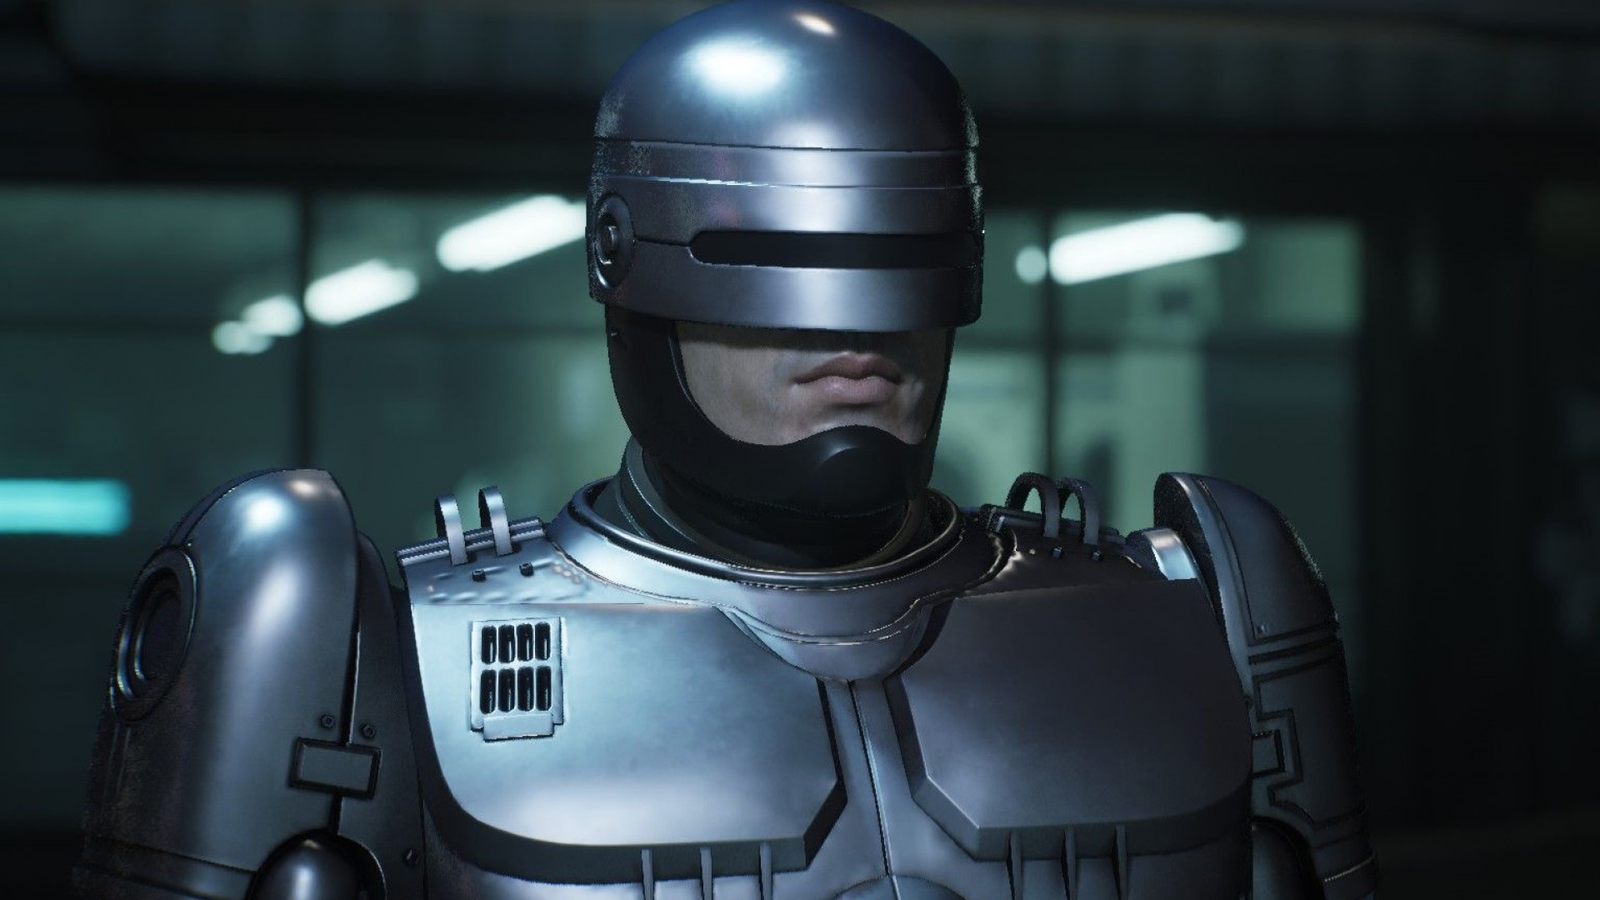 RoboCop: Rogue City Is UNBELIEVABLY GOOD! PS5 Review! 